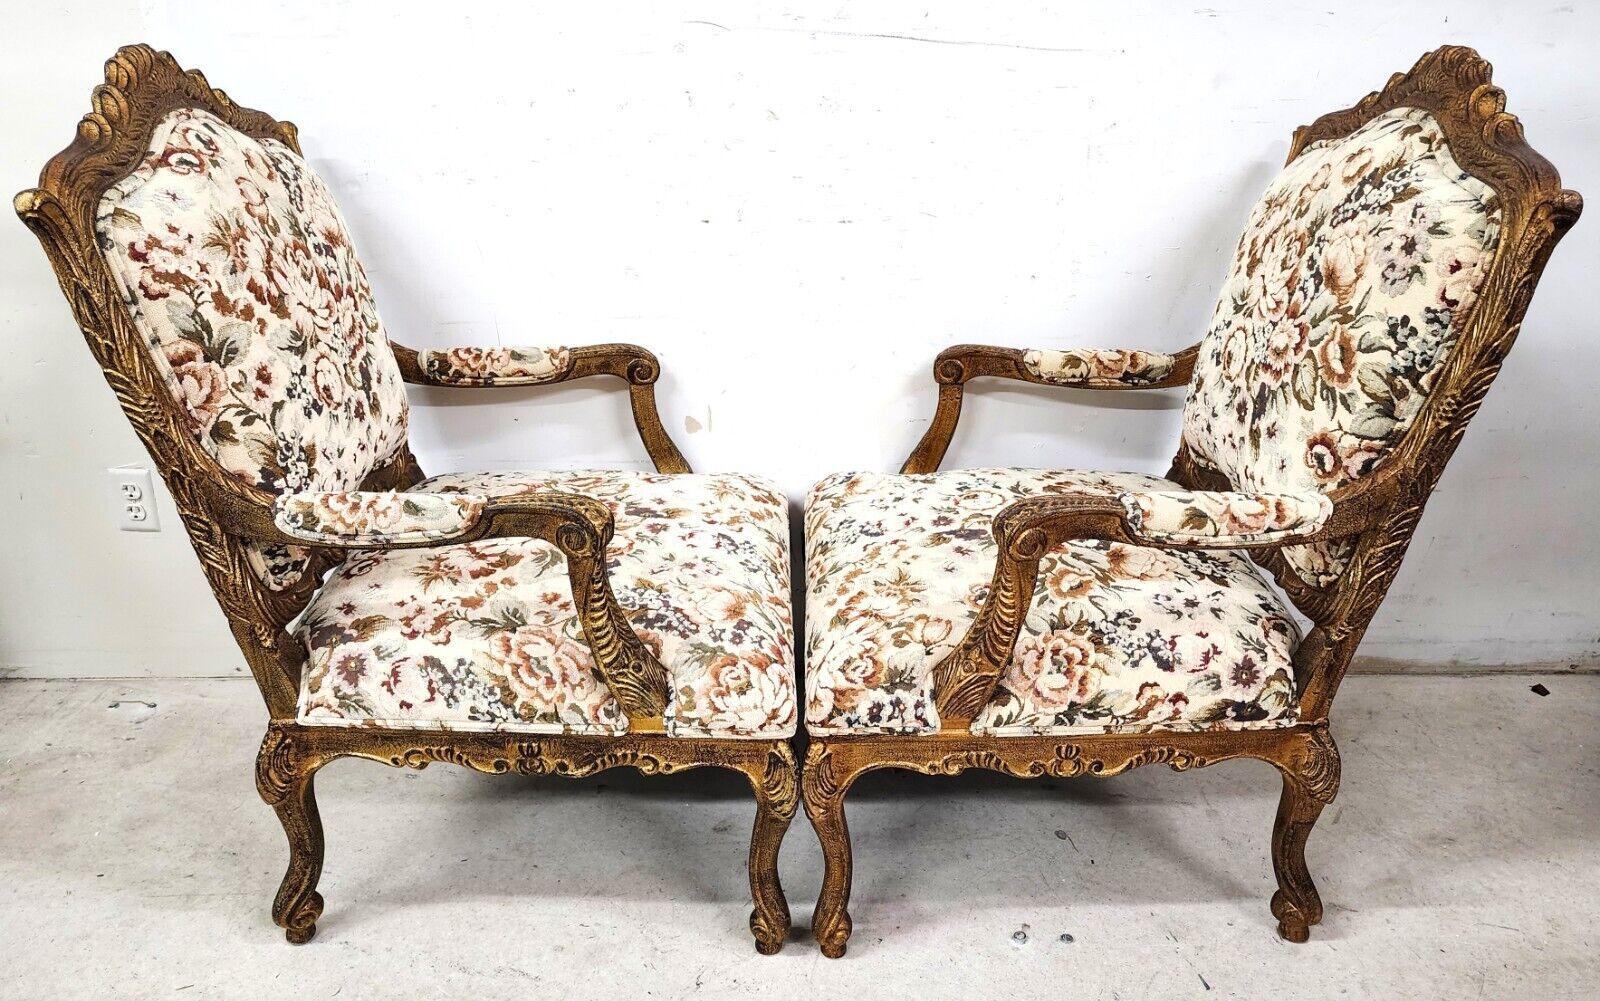 French Louis XV Rococo Giltwood Fauteuil Oversized Armchairs - a Pair For Sale 7